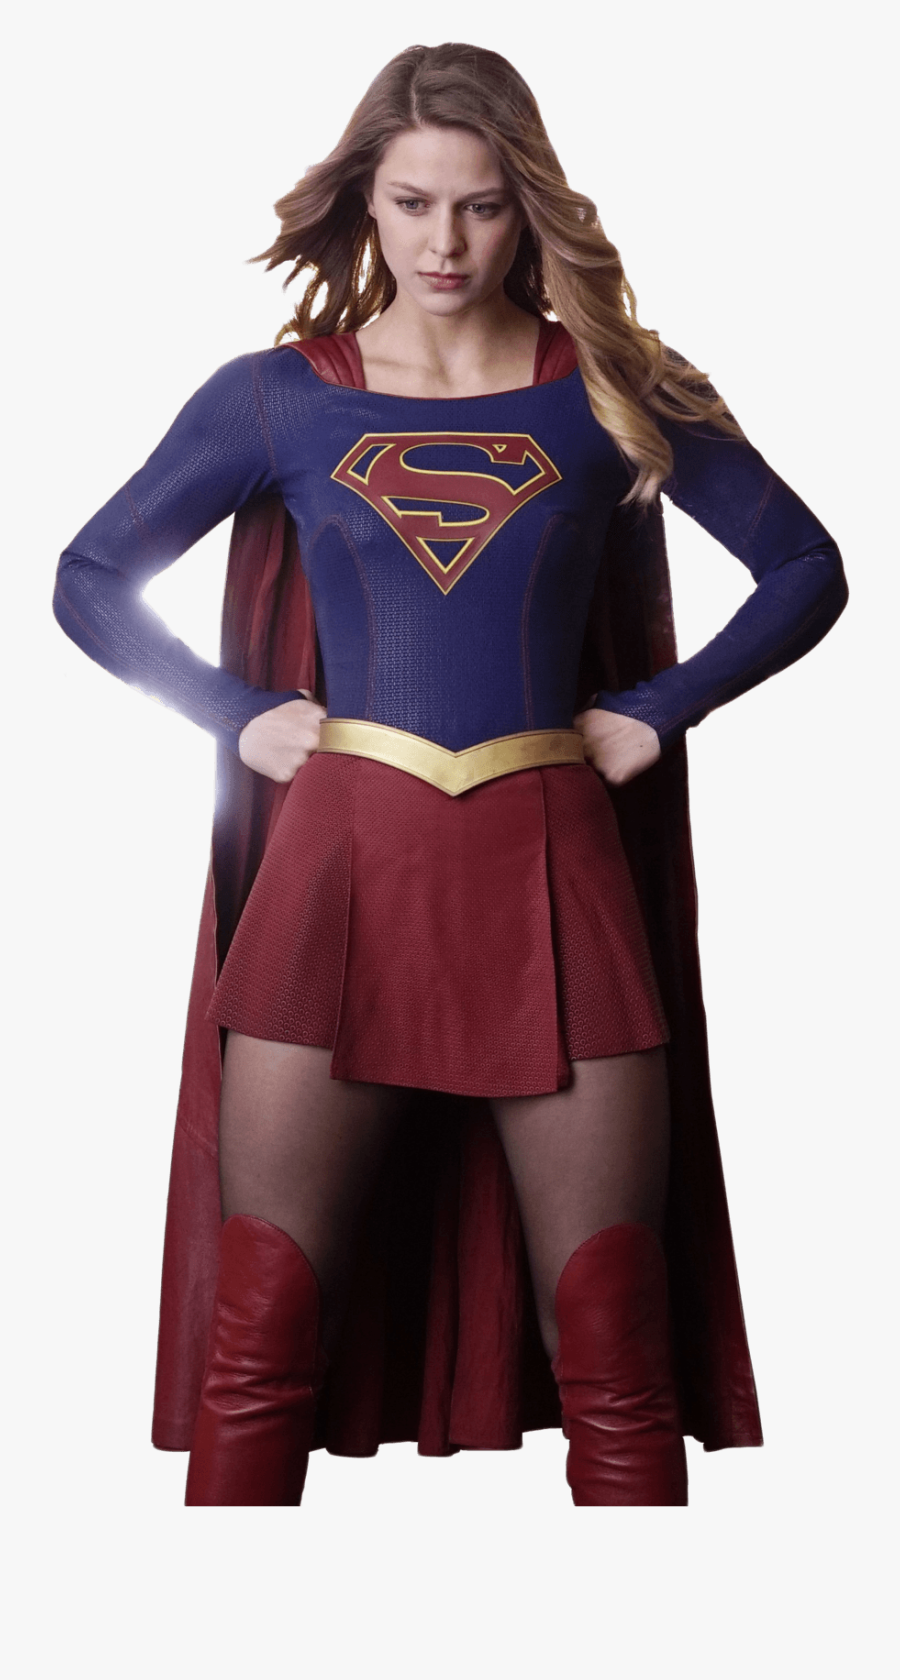 Super Girl In Action, Transparent Clipart